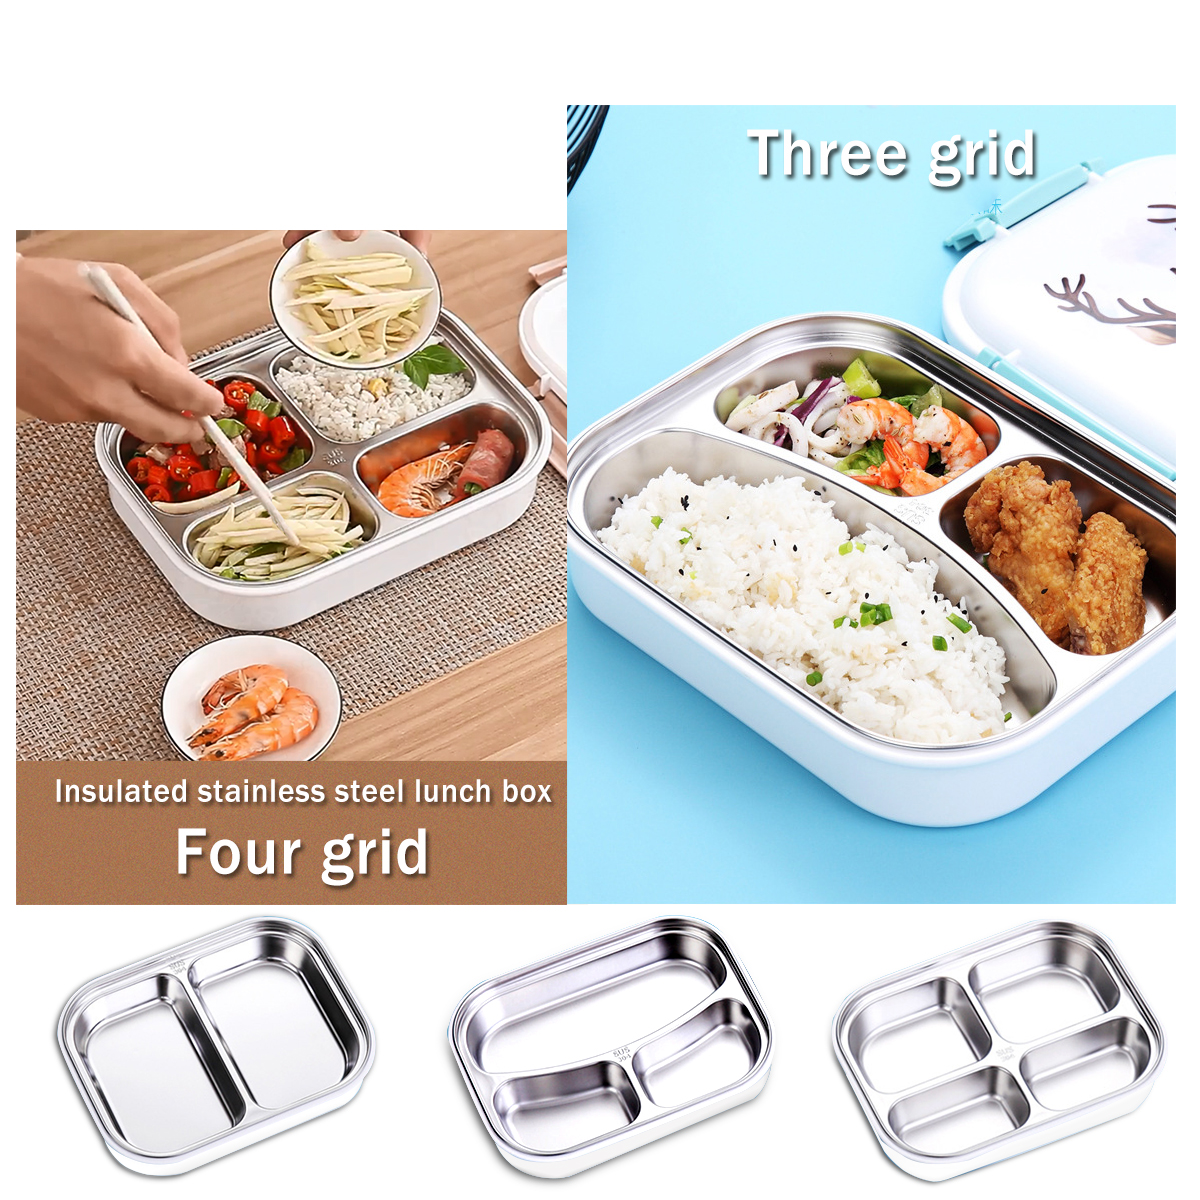 Outdoor-Picnic-Bento-Box-Stainless-Steel-Thermal-Food-Container-Lunch-Box-34-Grid-Japanese-Color-Pat-1428135-3